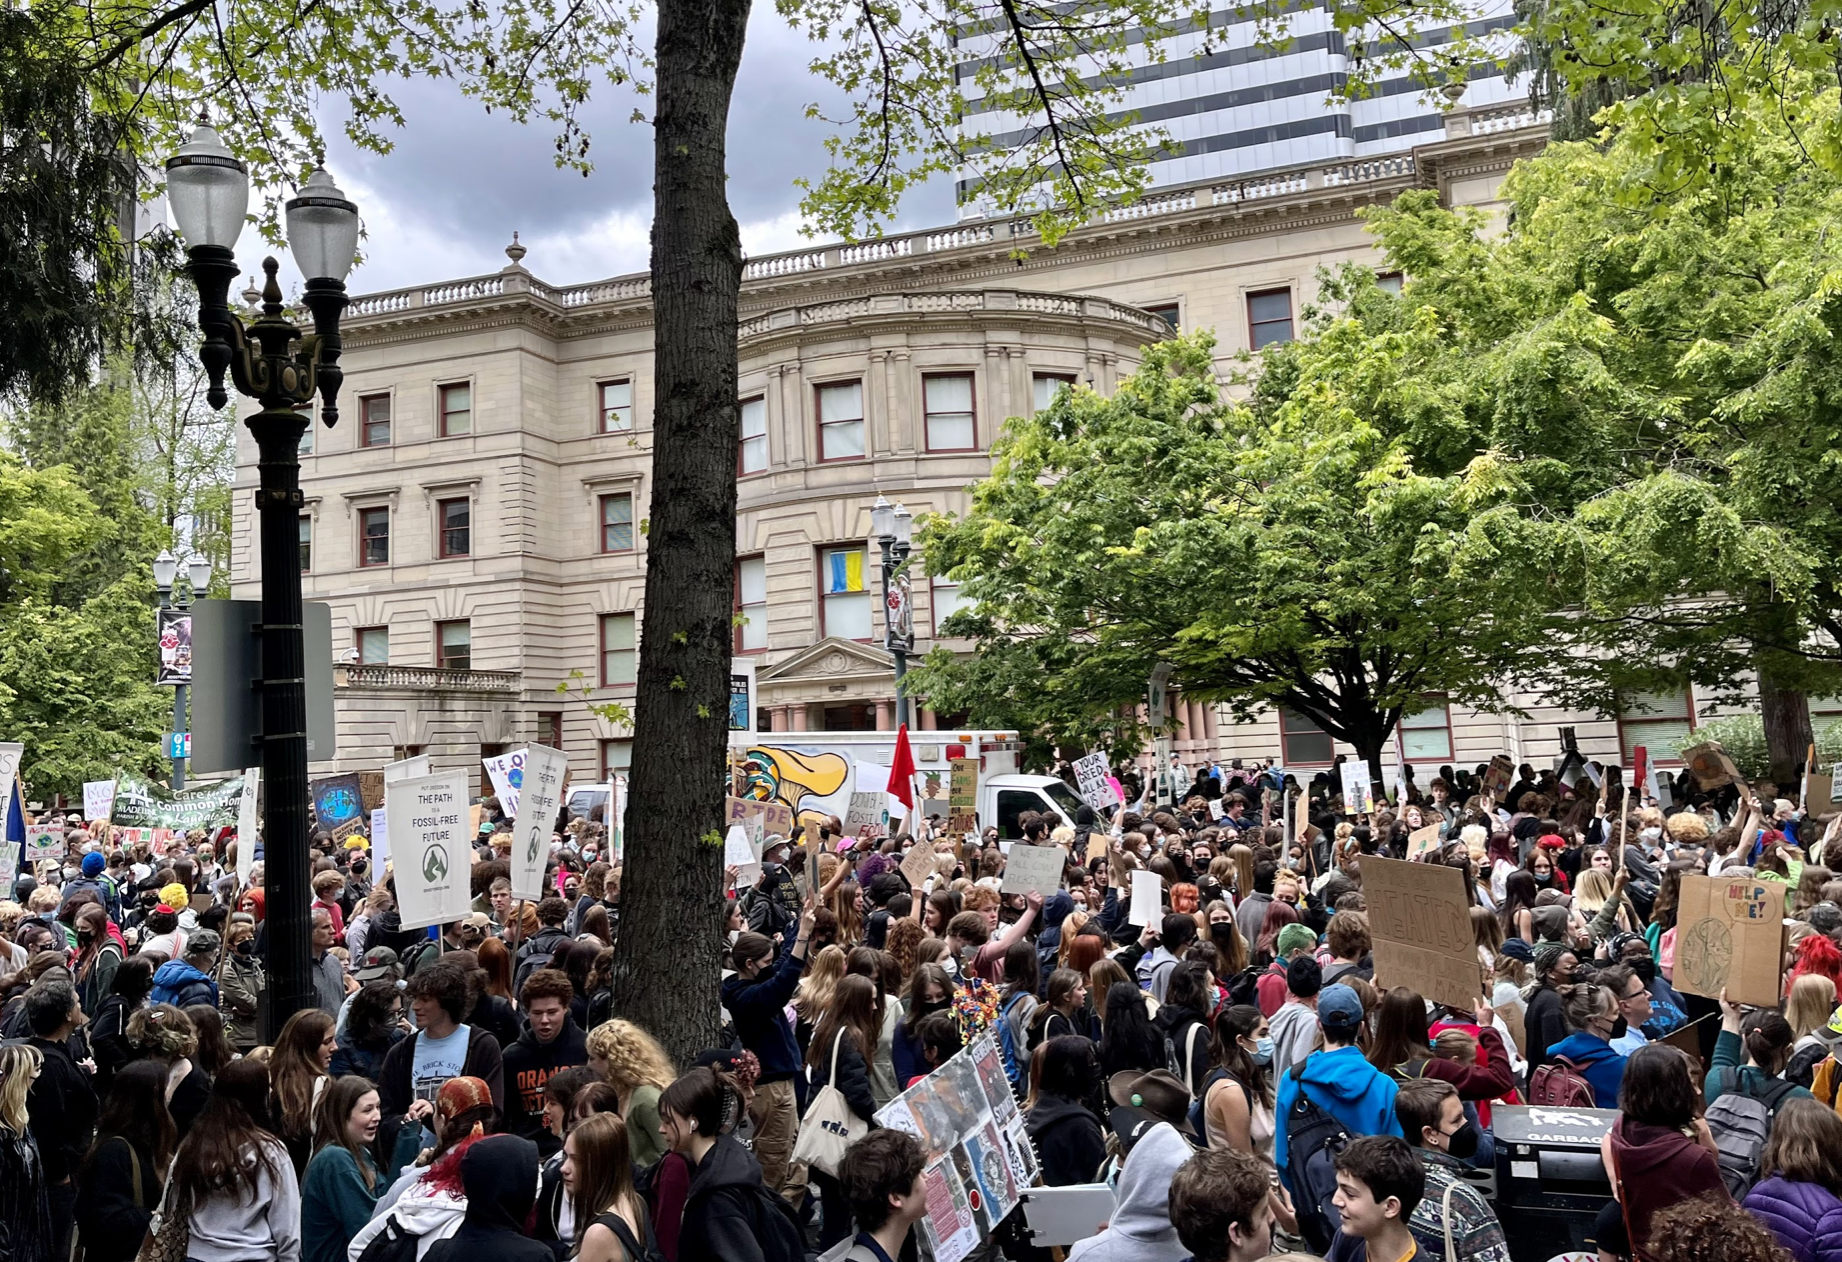 Large crowd of people outside Portland City Hall building.